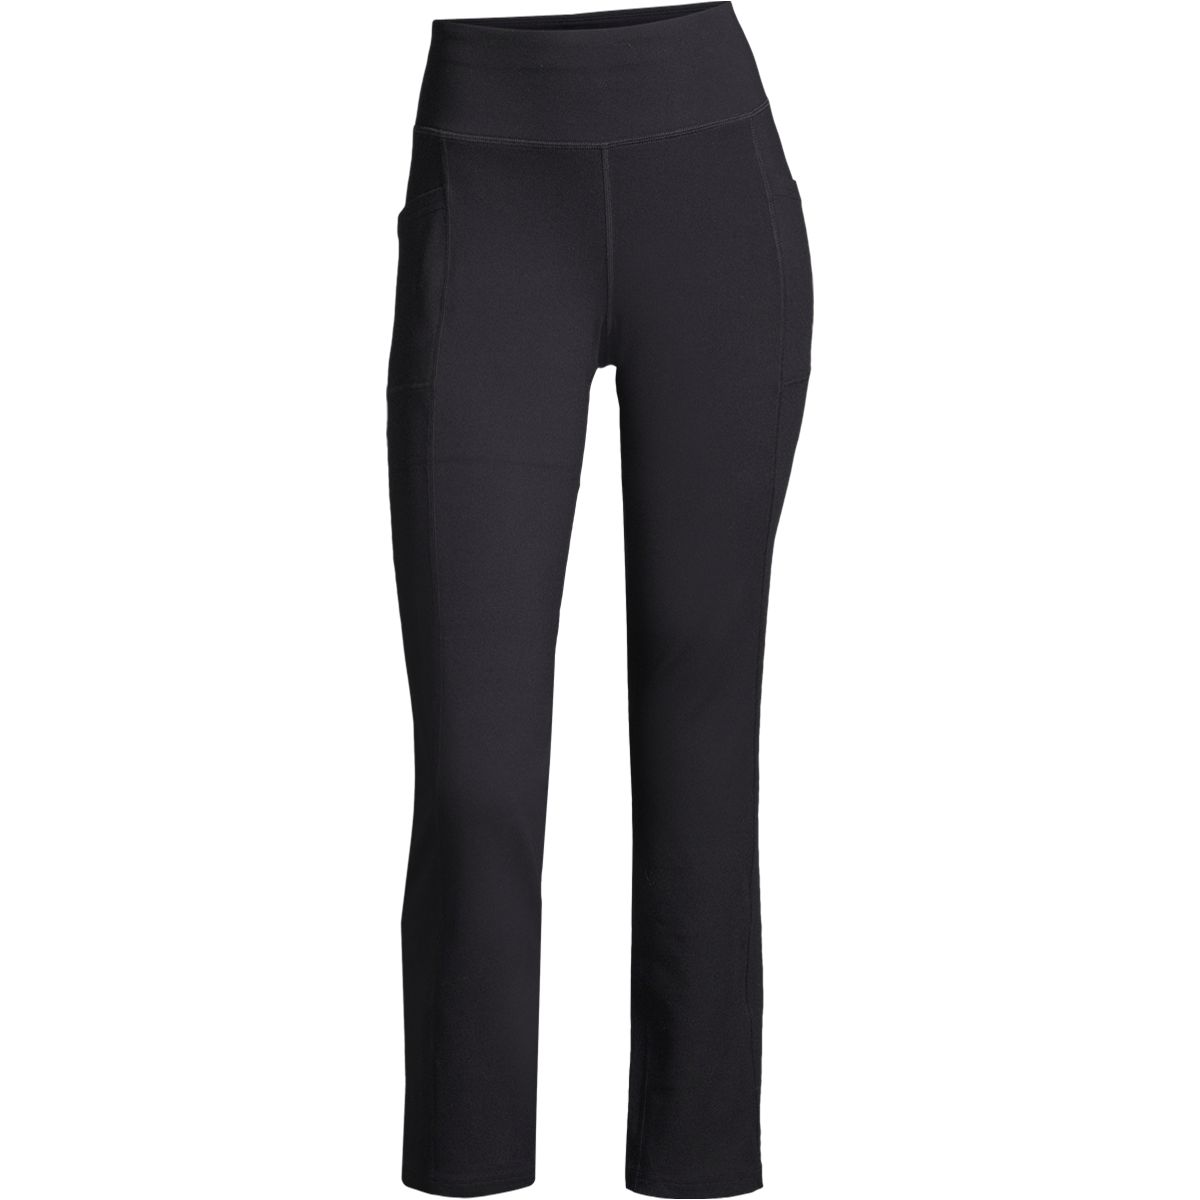 https://media-www.sportchek.ca/product/div-03-softgoods/dpt-72-casual-clothing/sdpt-02-womens/334210825/skechers-w-og-go-walk-pant-petite-blk-q122-w-1d4be865-b354-4248-98c6-08e2d5f5a6e4-jpgrendition.jpg?imdensity=1&imwidth=1244&impolicy=mZoom